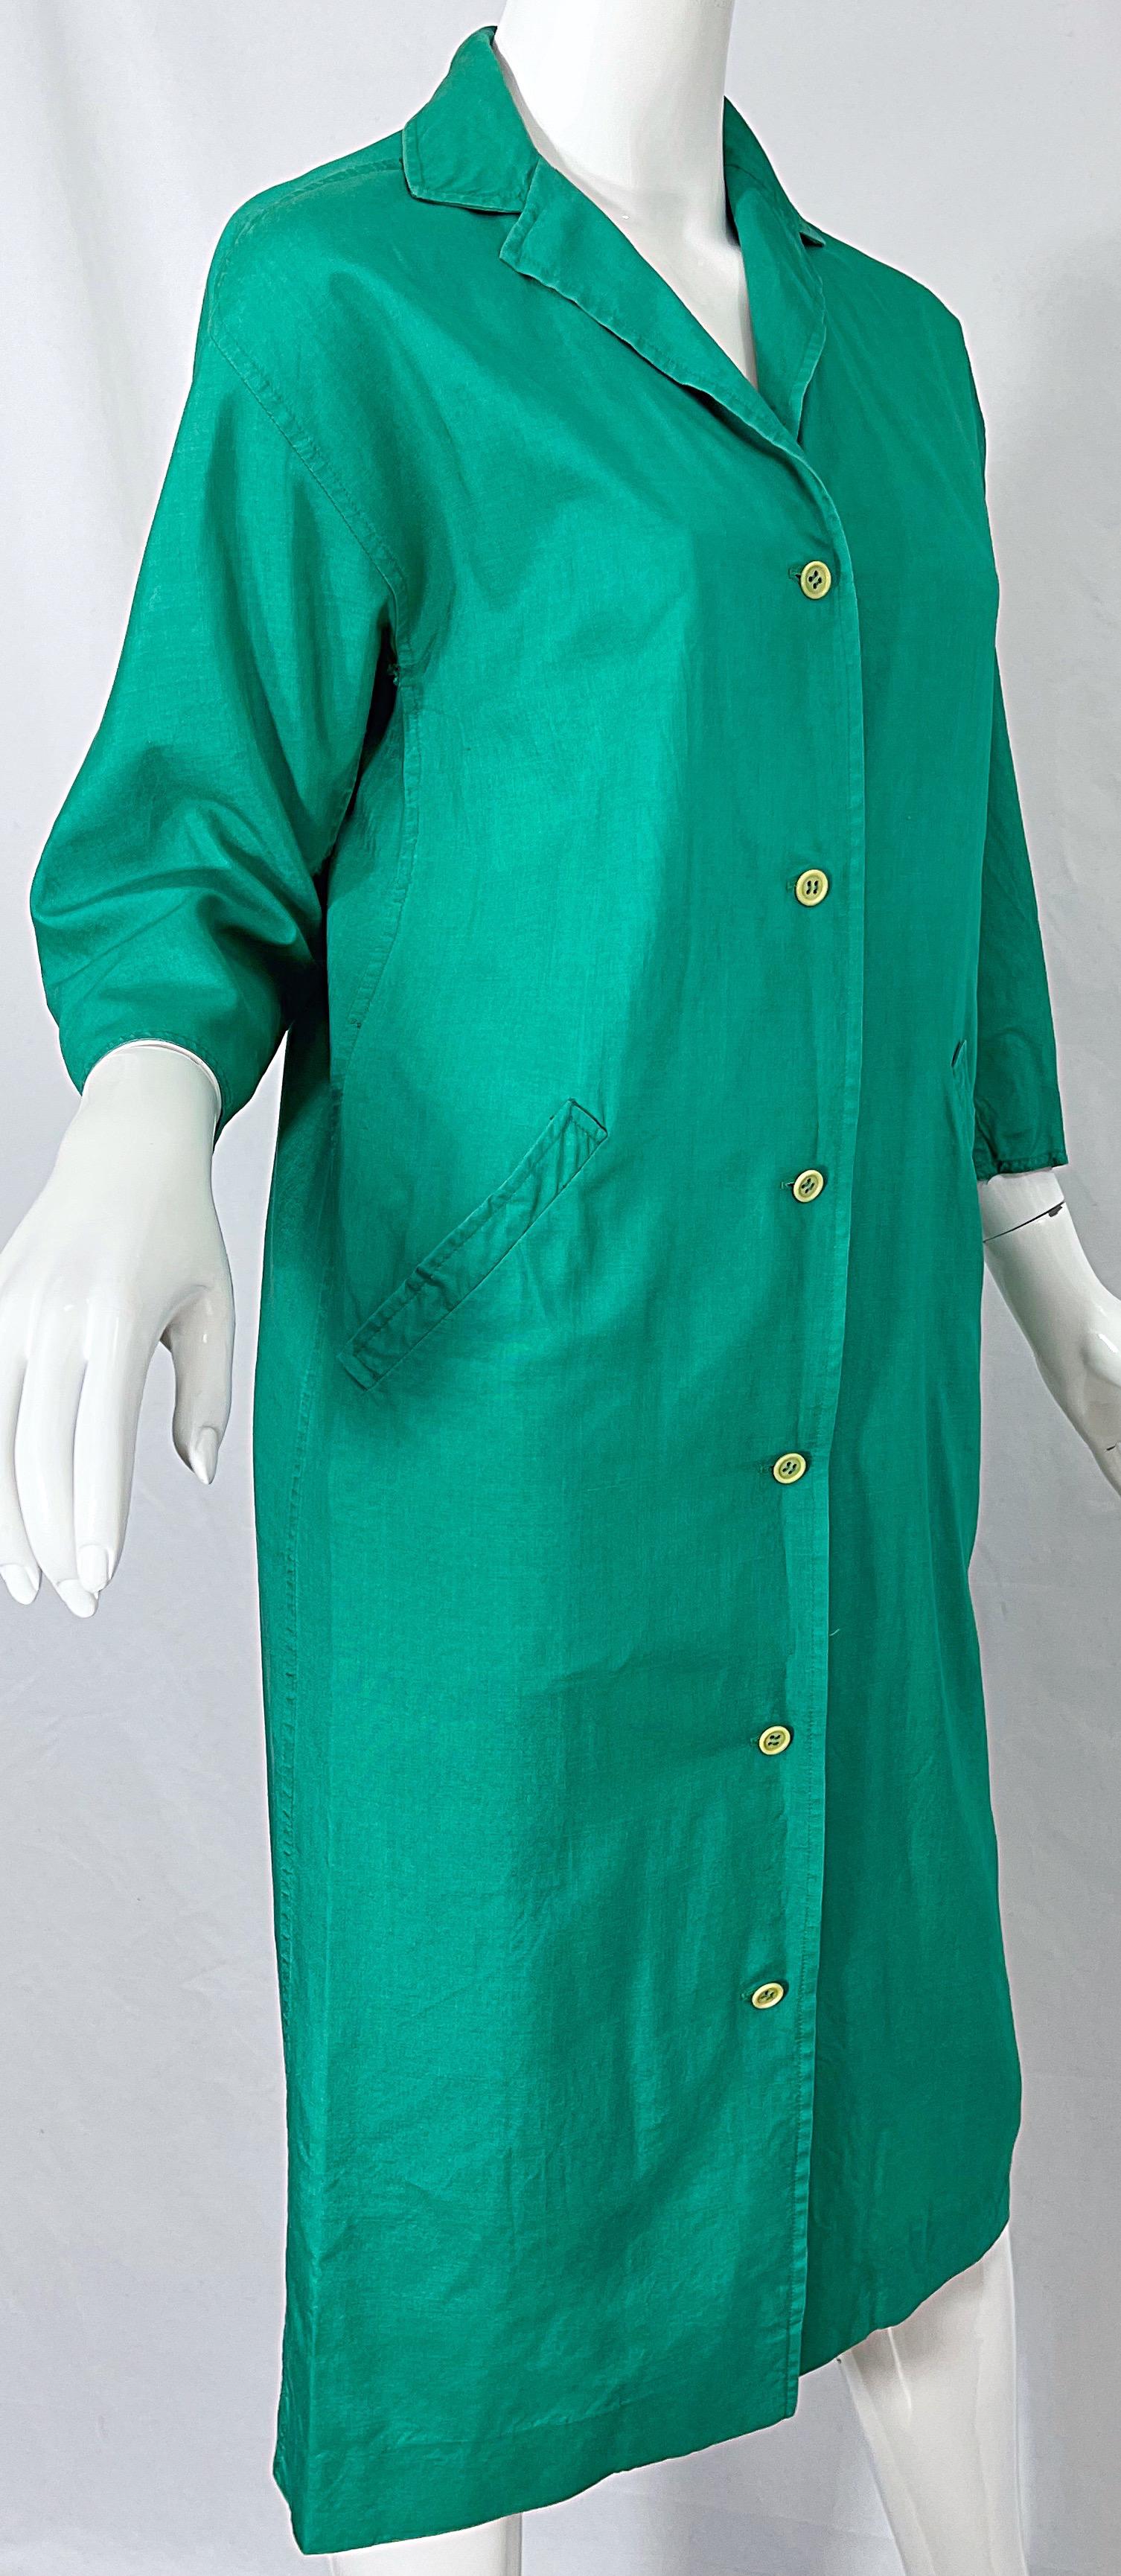 1970s Halston Kelly Green Silk 3/4 Sleeves Vintage 70s Shirt Dress w/ Pockets In Excellent Condition For Sale In San Diego, CA